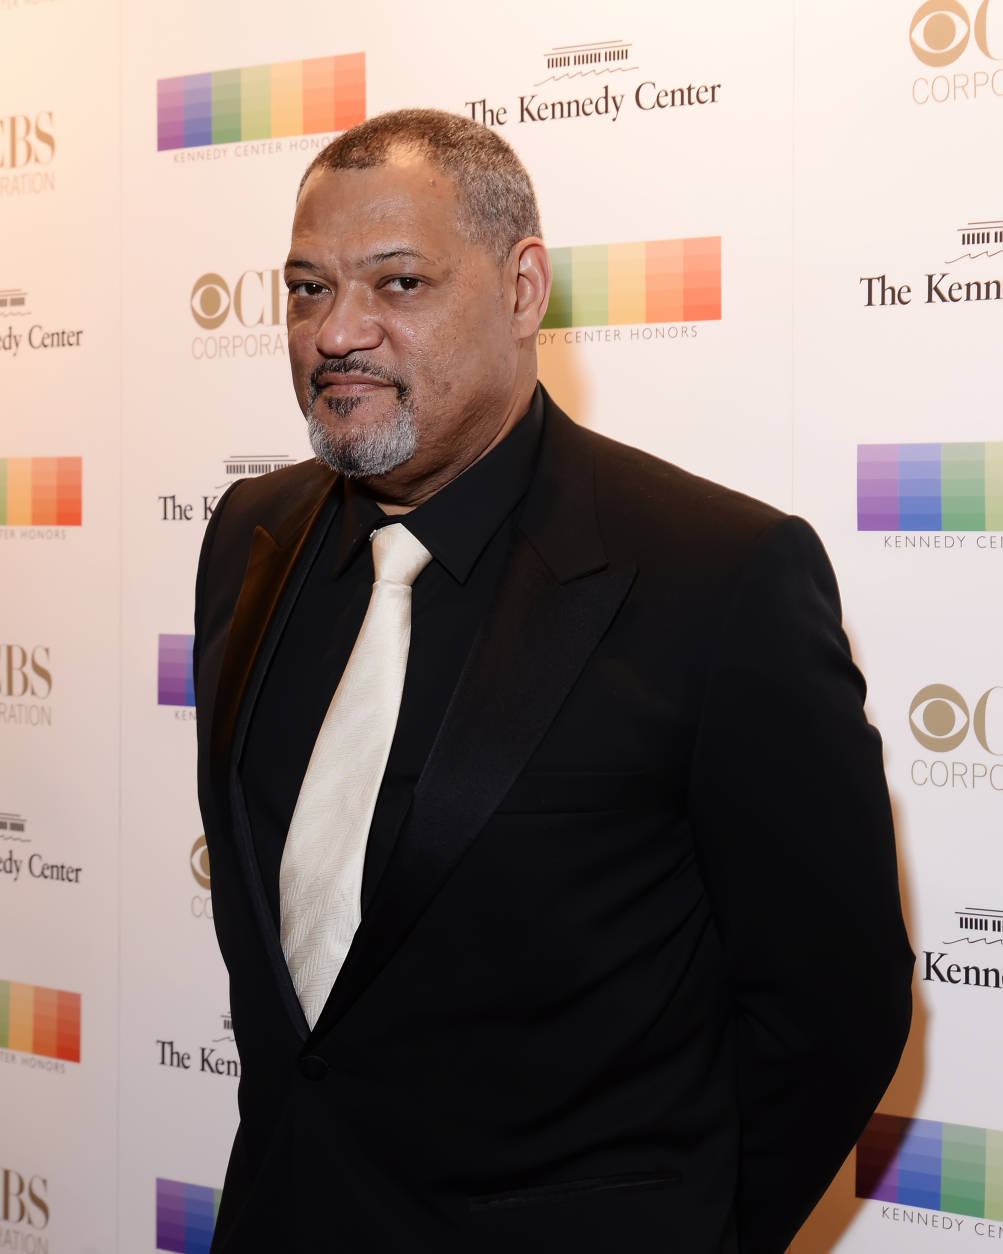 Actor Laurence Fishburne. (Courtesy Shannon Finney, <a href="http://www.shannonfinneyphotography.com">www.shannonfinneyphotography.com</a>)